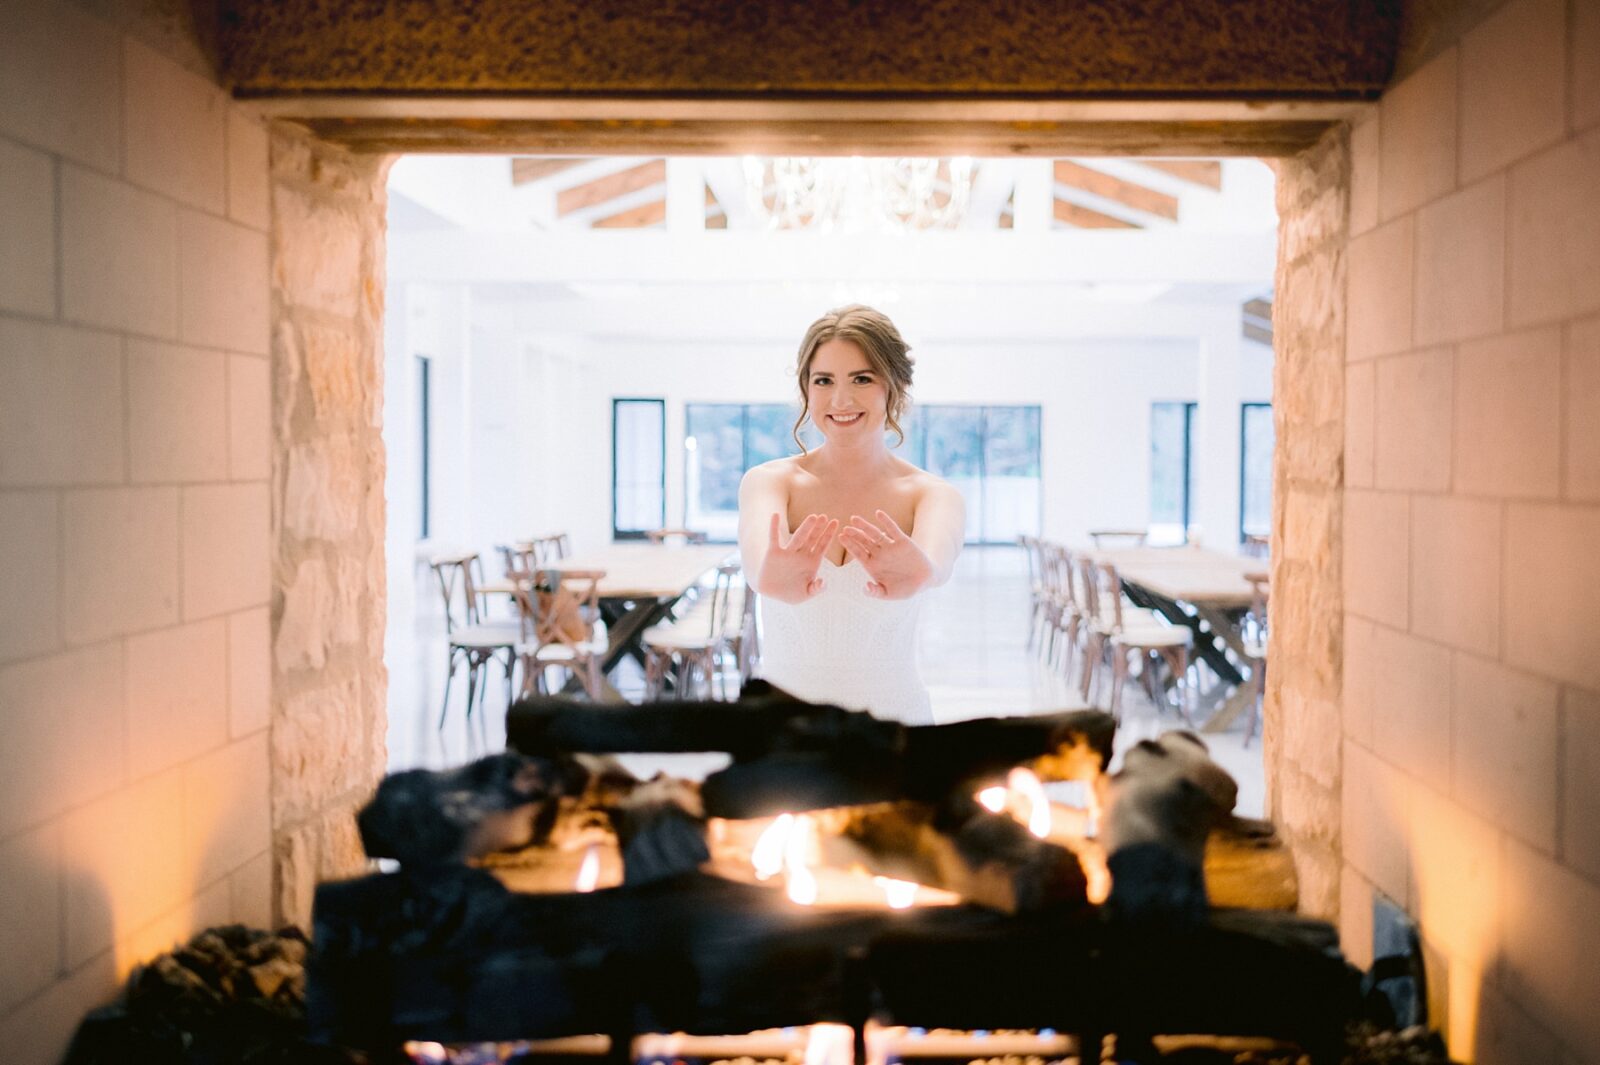 winter bridal session, bridal session, bride photography, the videre estate, hill country wedding venue, wimberley wedding venue, austin wedding photography, tara paige weddings, 